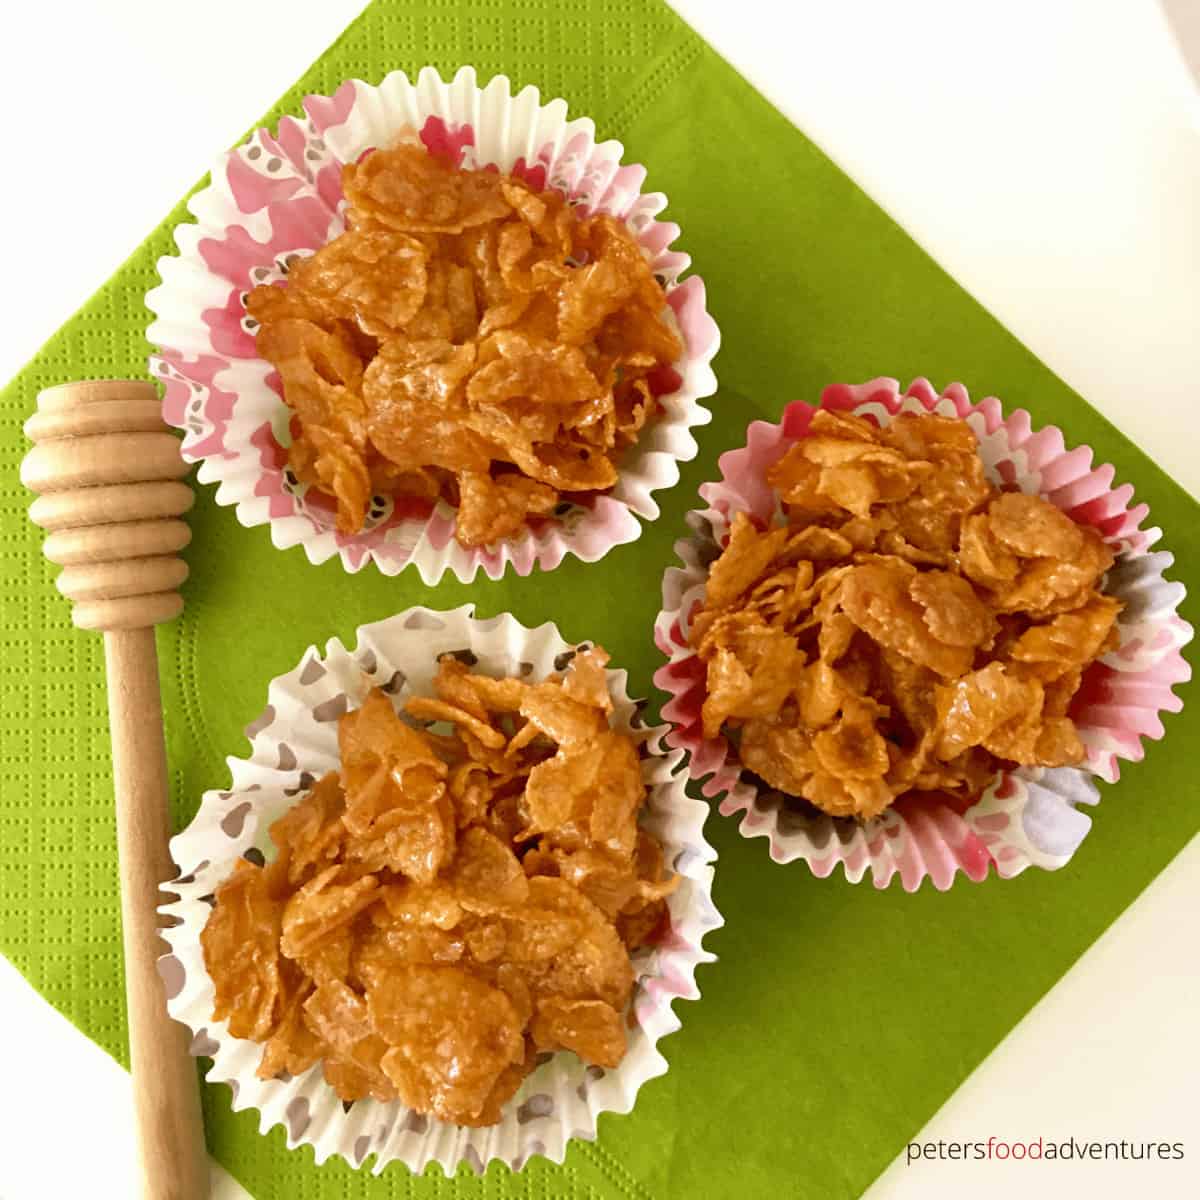 A classic Australian kids party treat made from Corn Flakes, so simple and easy to make, like Rice Krispies Squares! Australian Honey Joys Recipe or Cornflake Cupcakes